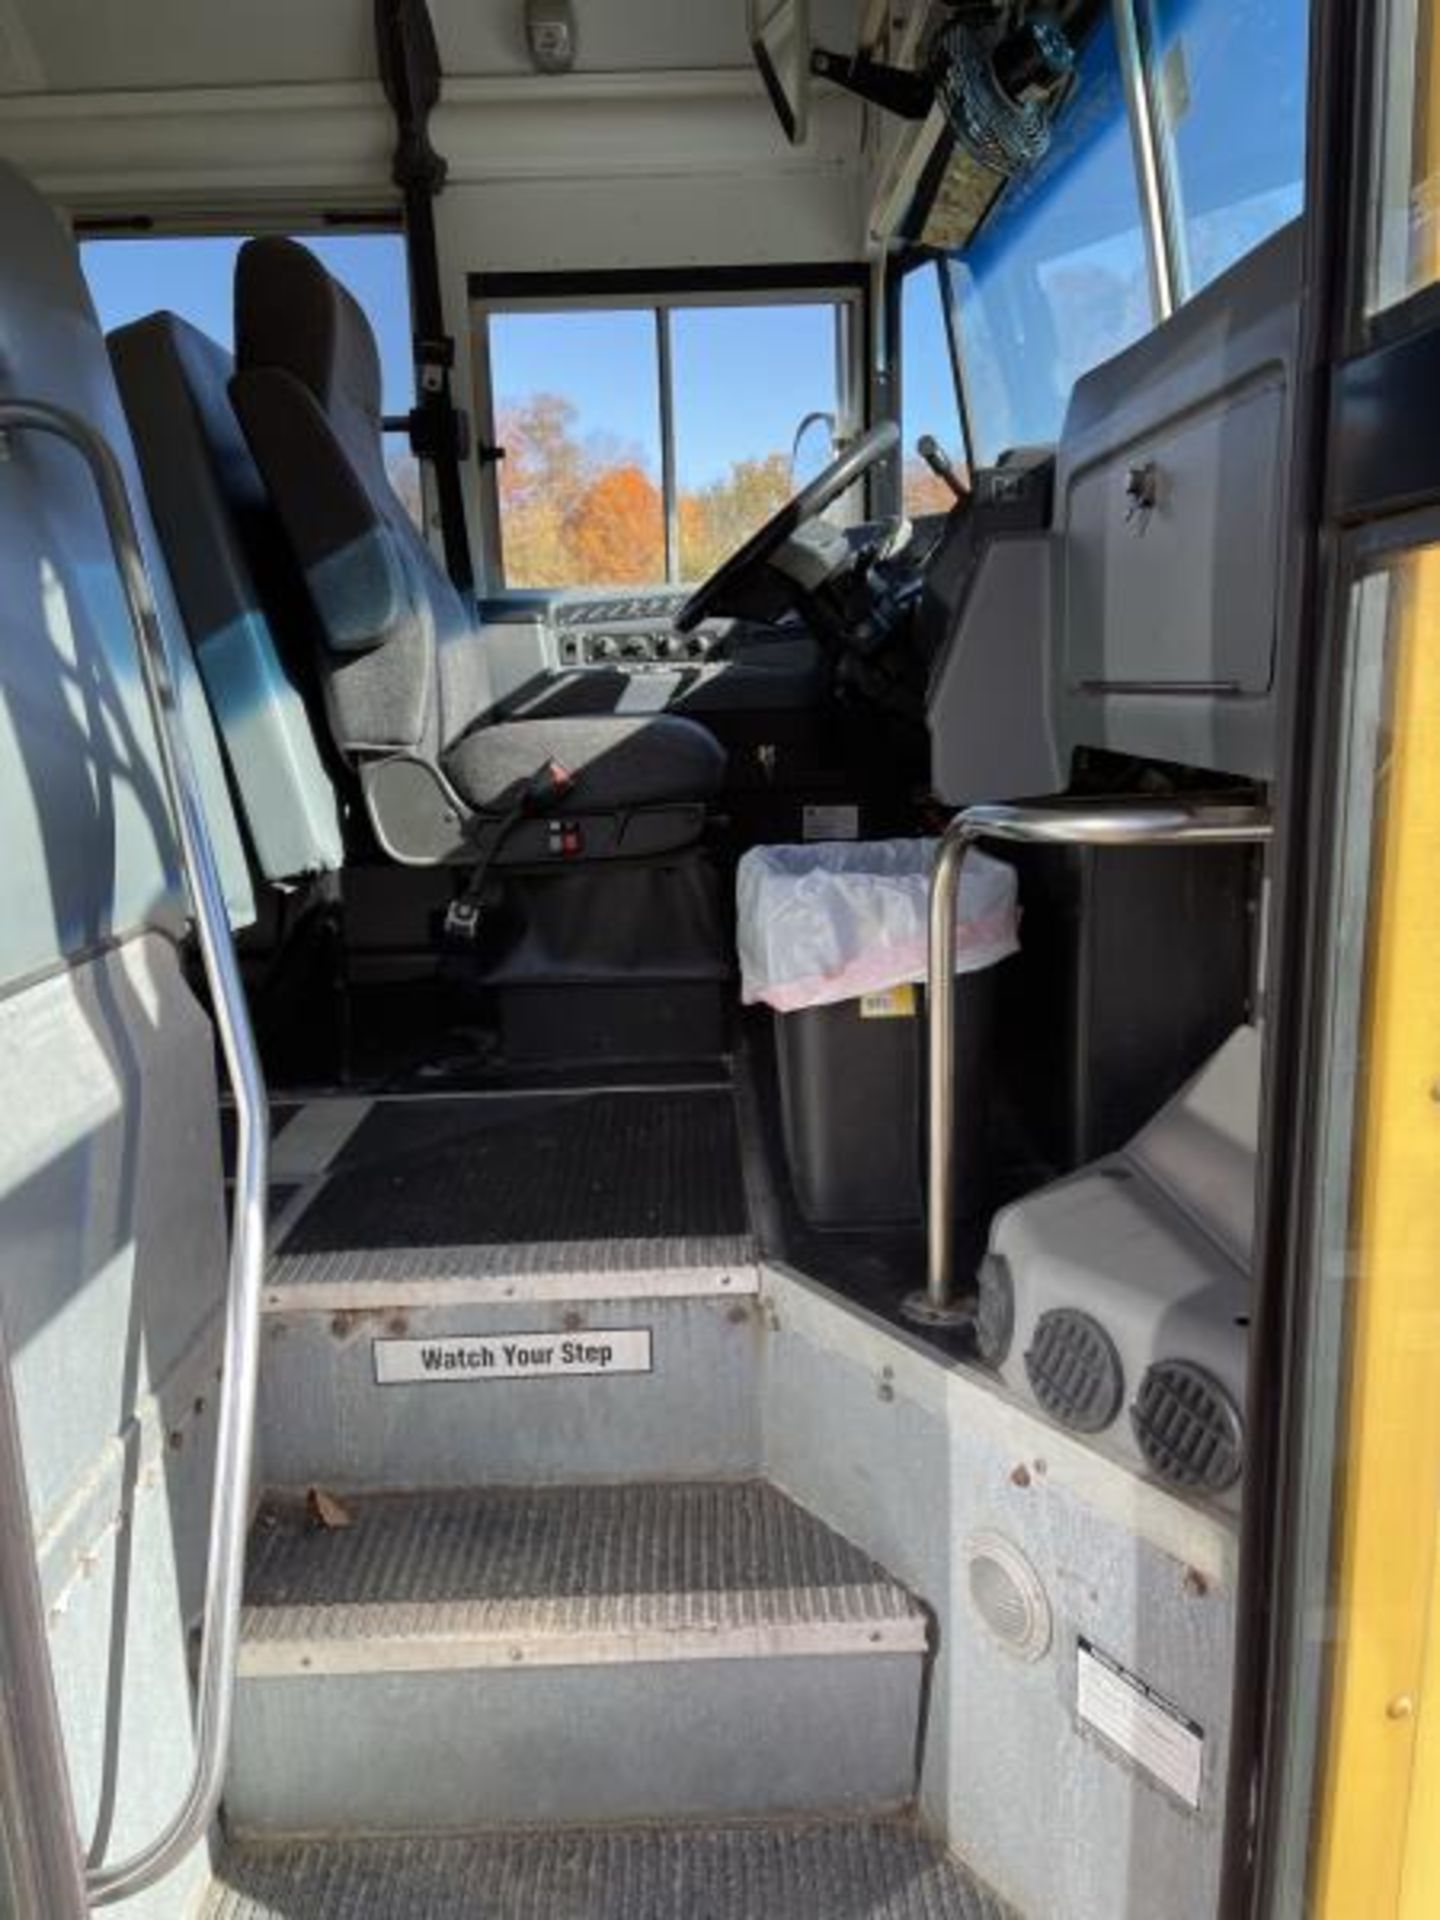 2011 Blue Bird Bus, Odometer Reads 193,151, Engine Starts, New Batteries, VIN: 1BAKGCPA9BF278622 - Image 28 of 40